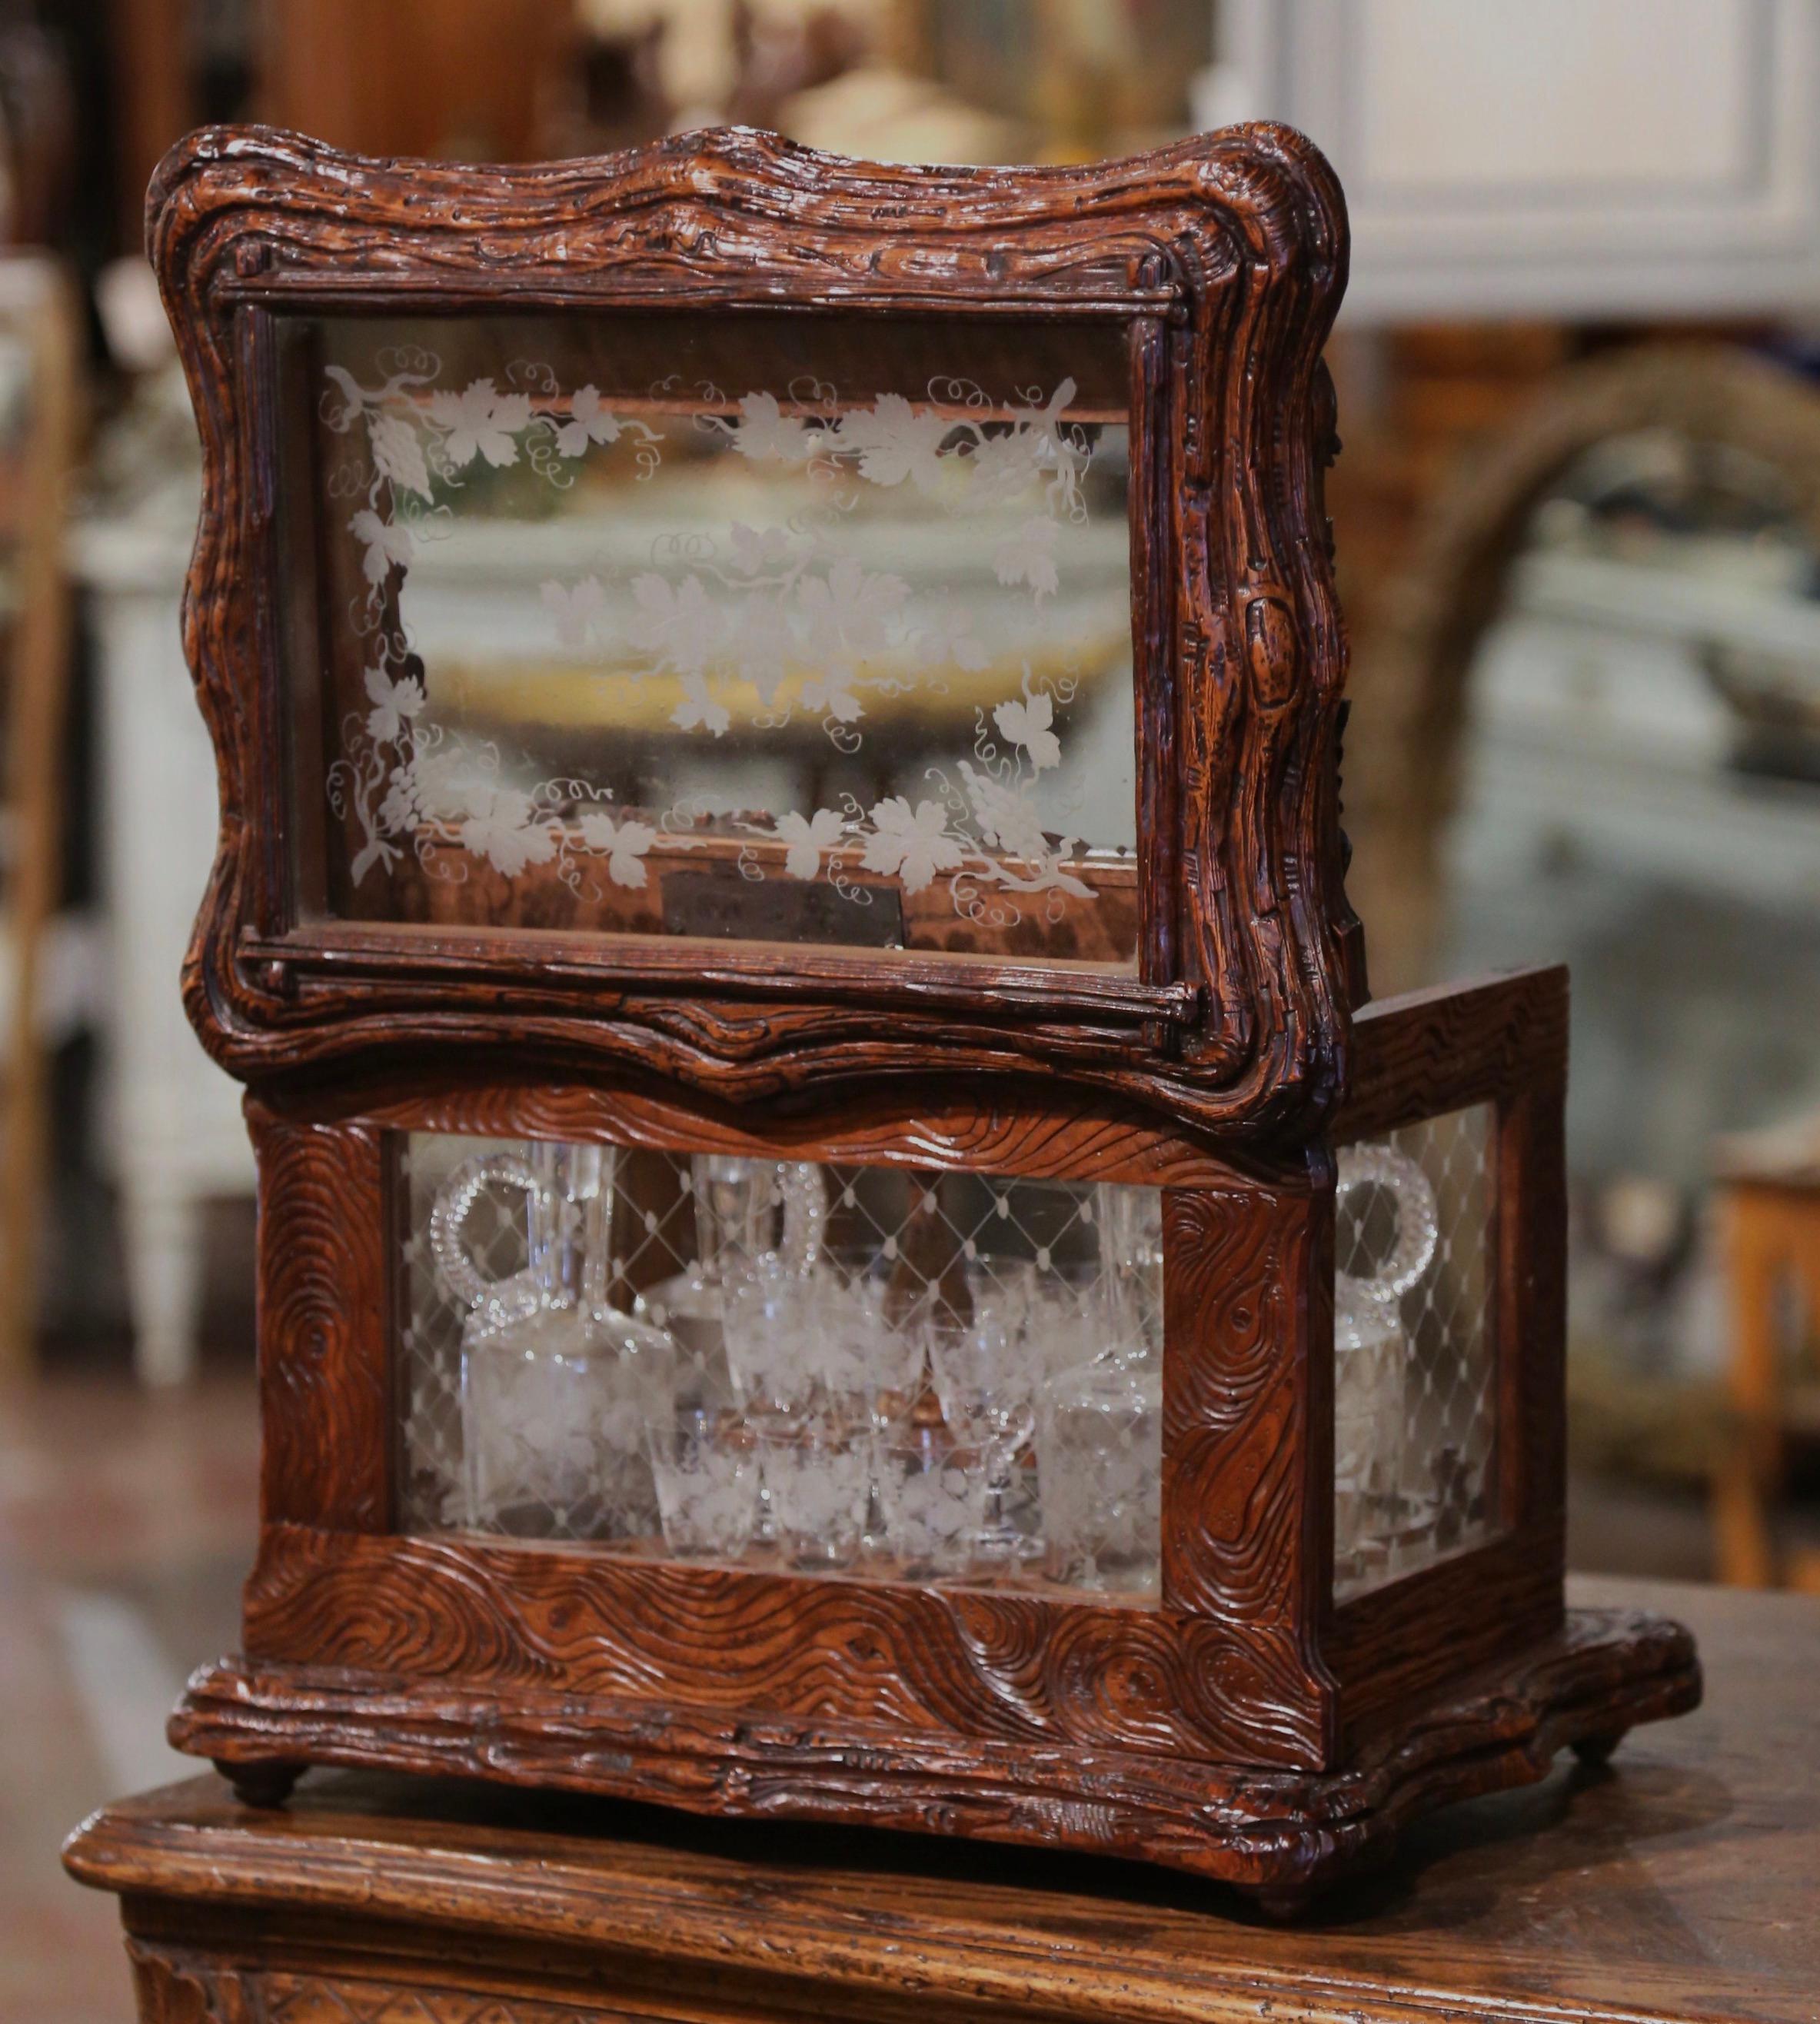 19th Century French Black Forest Carved Walnut and Glass Complete Liquor Box For Sale 10